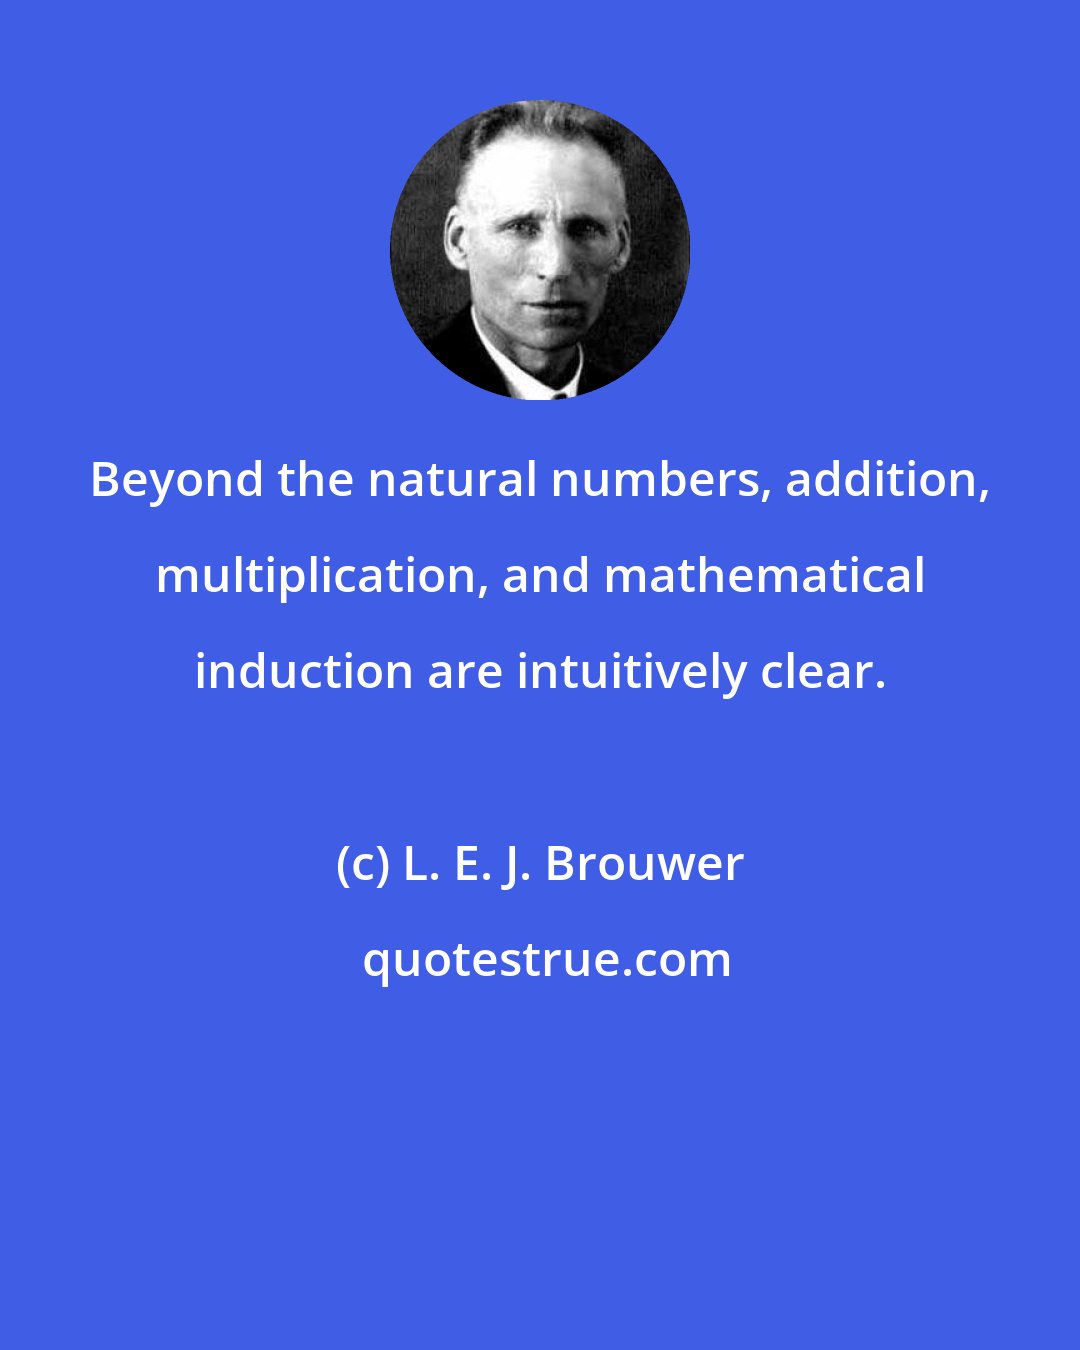 L. E. J. Brouwer: Beyond the natural numbers, addition, multiplication, and mathematical induction are intuitively clear.